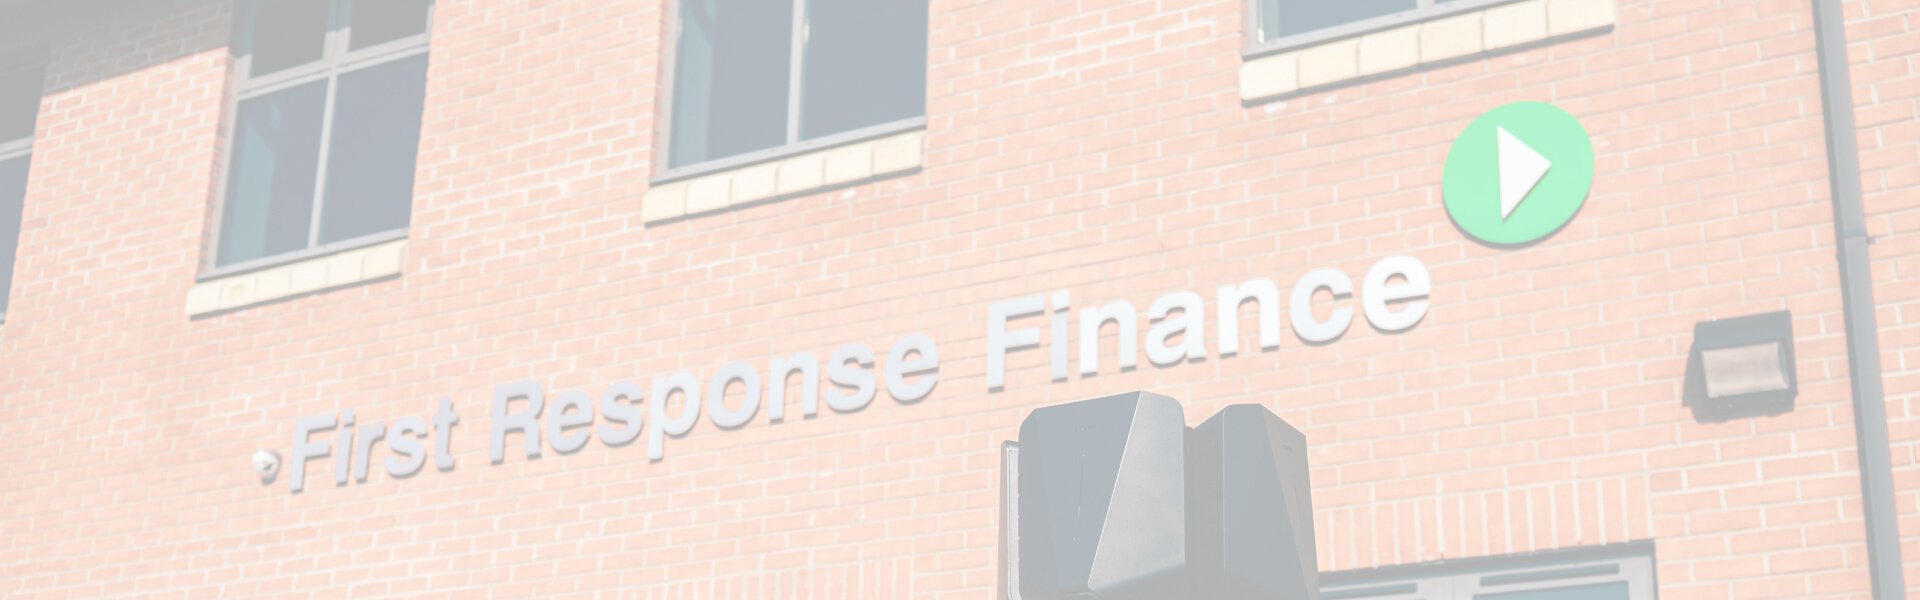 <h2>Who are First Response Finance?</h2>